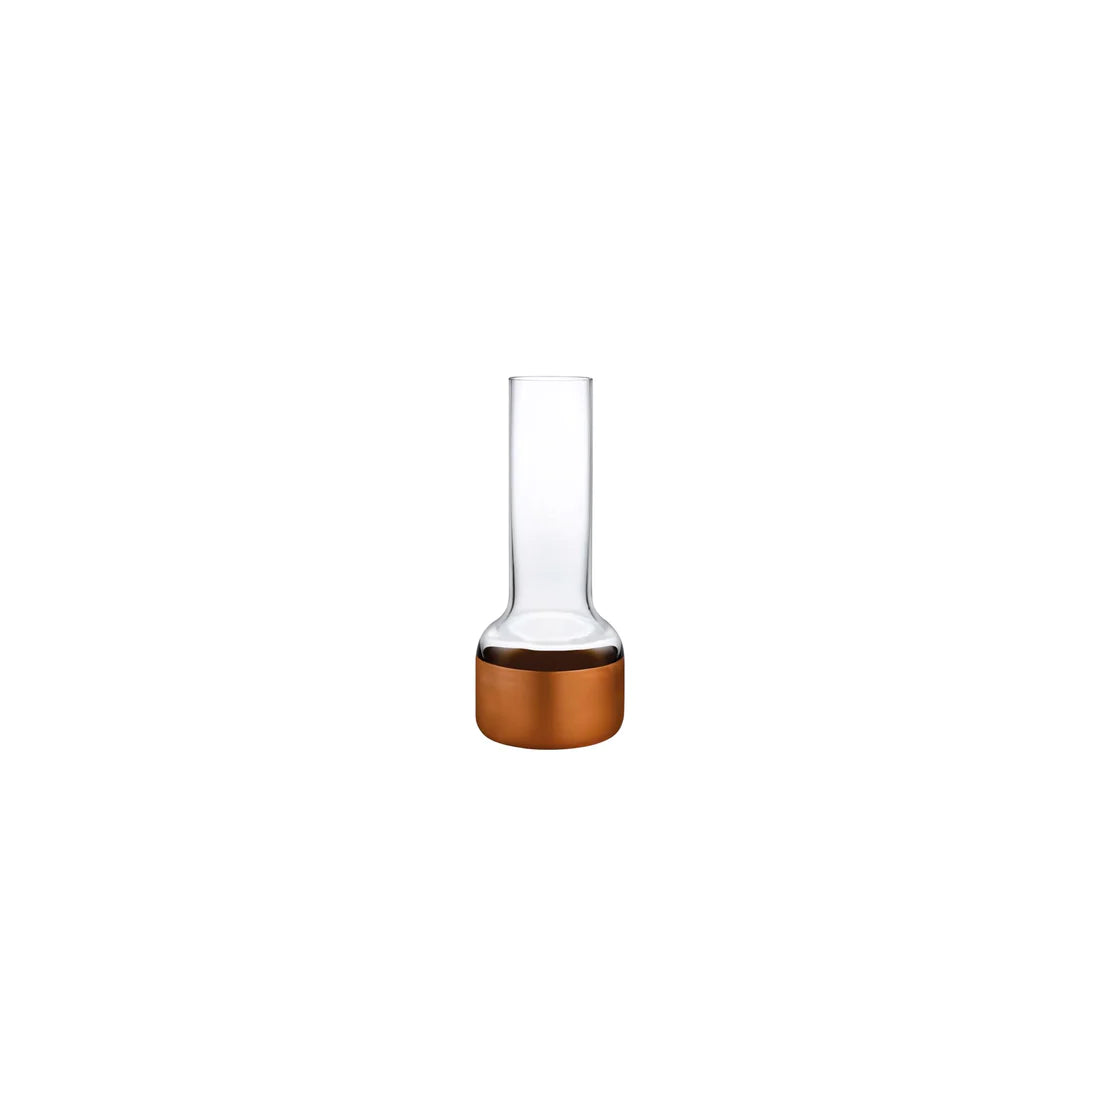 Contour Bud vase with Clear Top and Copper Base - Qavunco